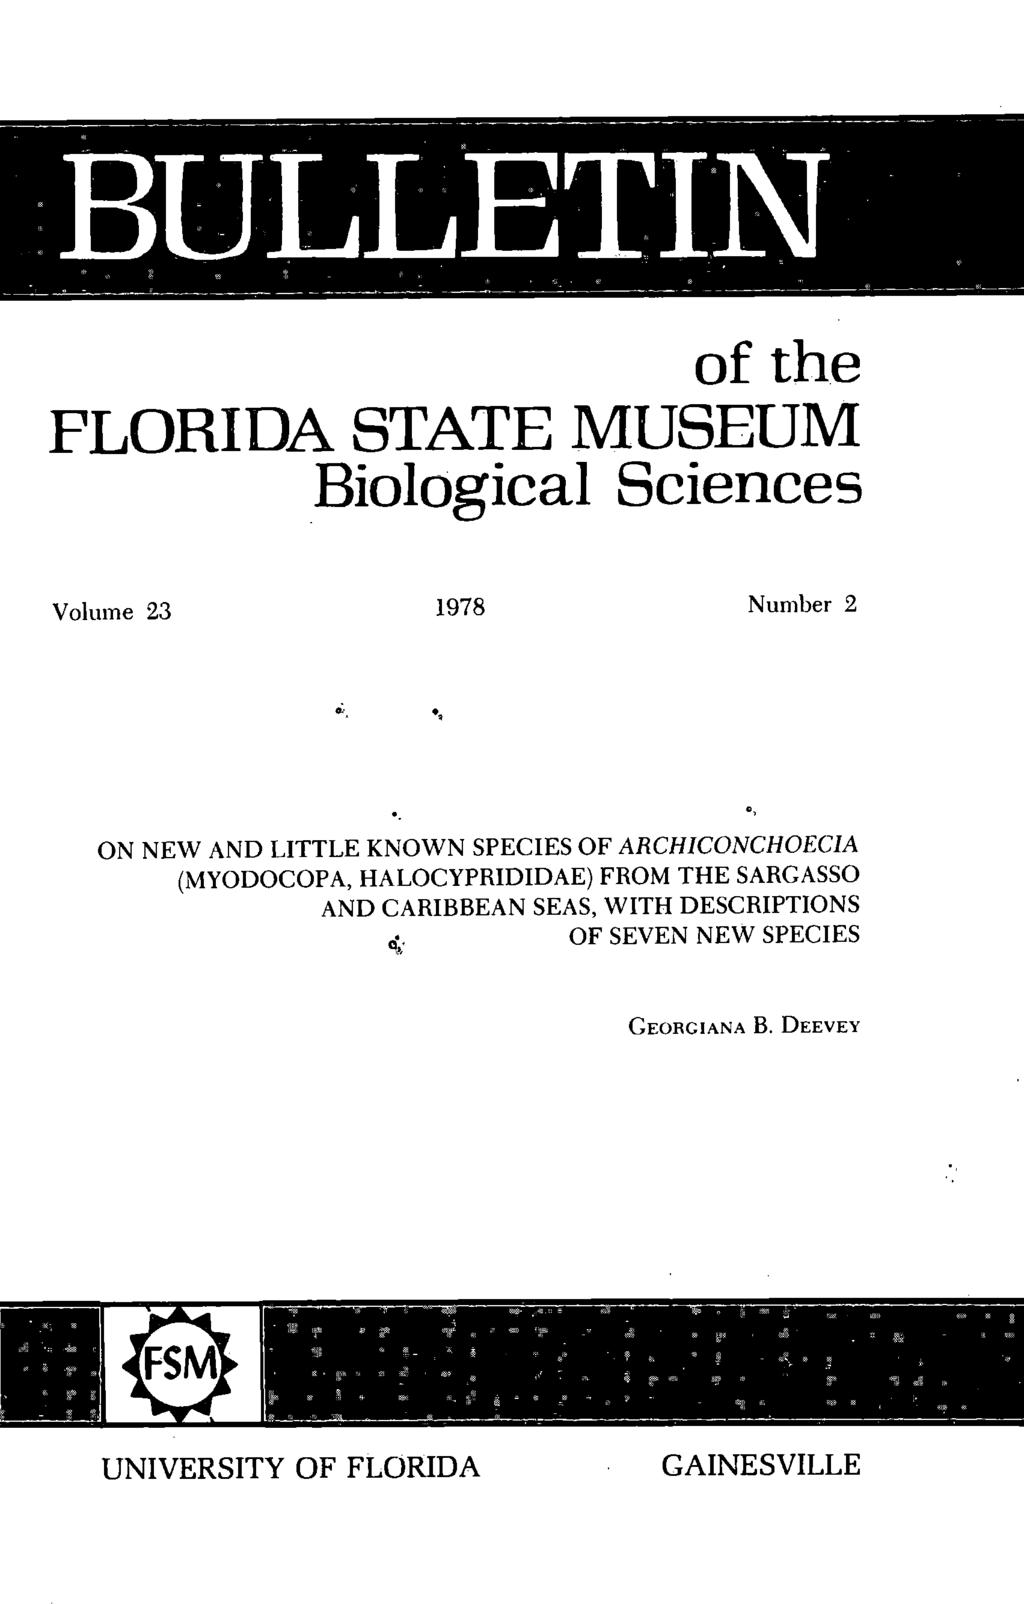 BULLETIN of the FLORIDA STATE MUSEUM Biological Sciences Volume 23 1978 Number 2 ON NEW AND LITTLE KNOWN SPECIES OF ARCHICONCHOECIA (MYODOCOPA, HALOCYPRIDIDAE) FROM THE SARGASSO